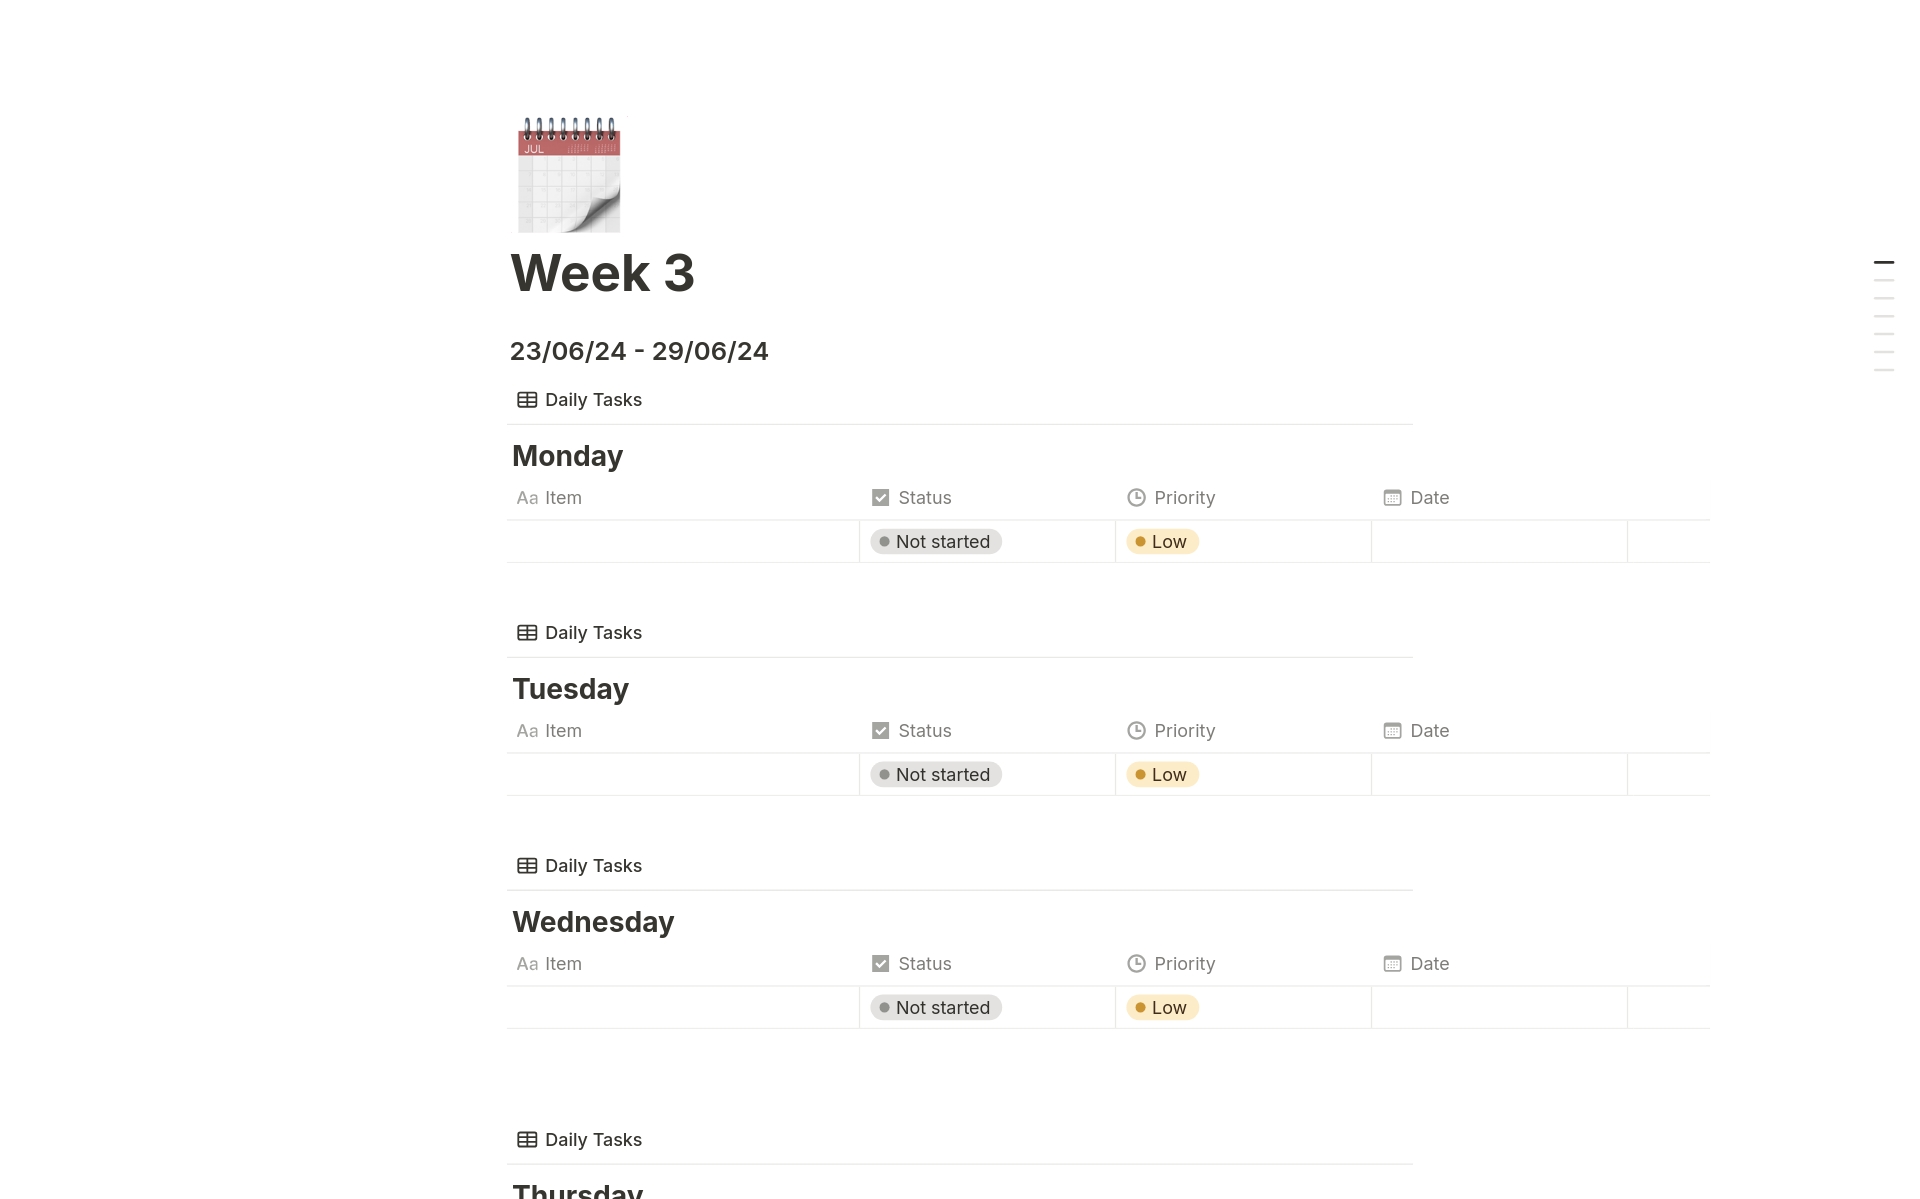 This is a simple task tracker to help you stay on top of your weeks and days. It helps you keep track of all tasks you need to do each day, every week, every year.